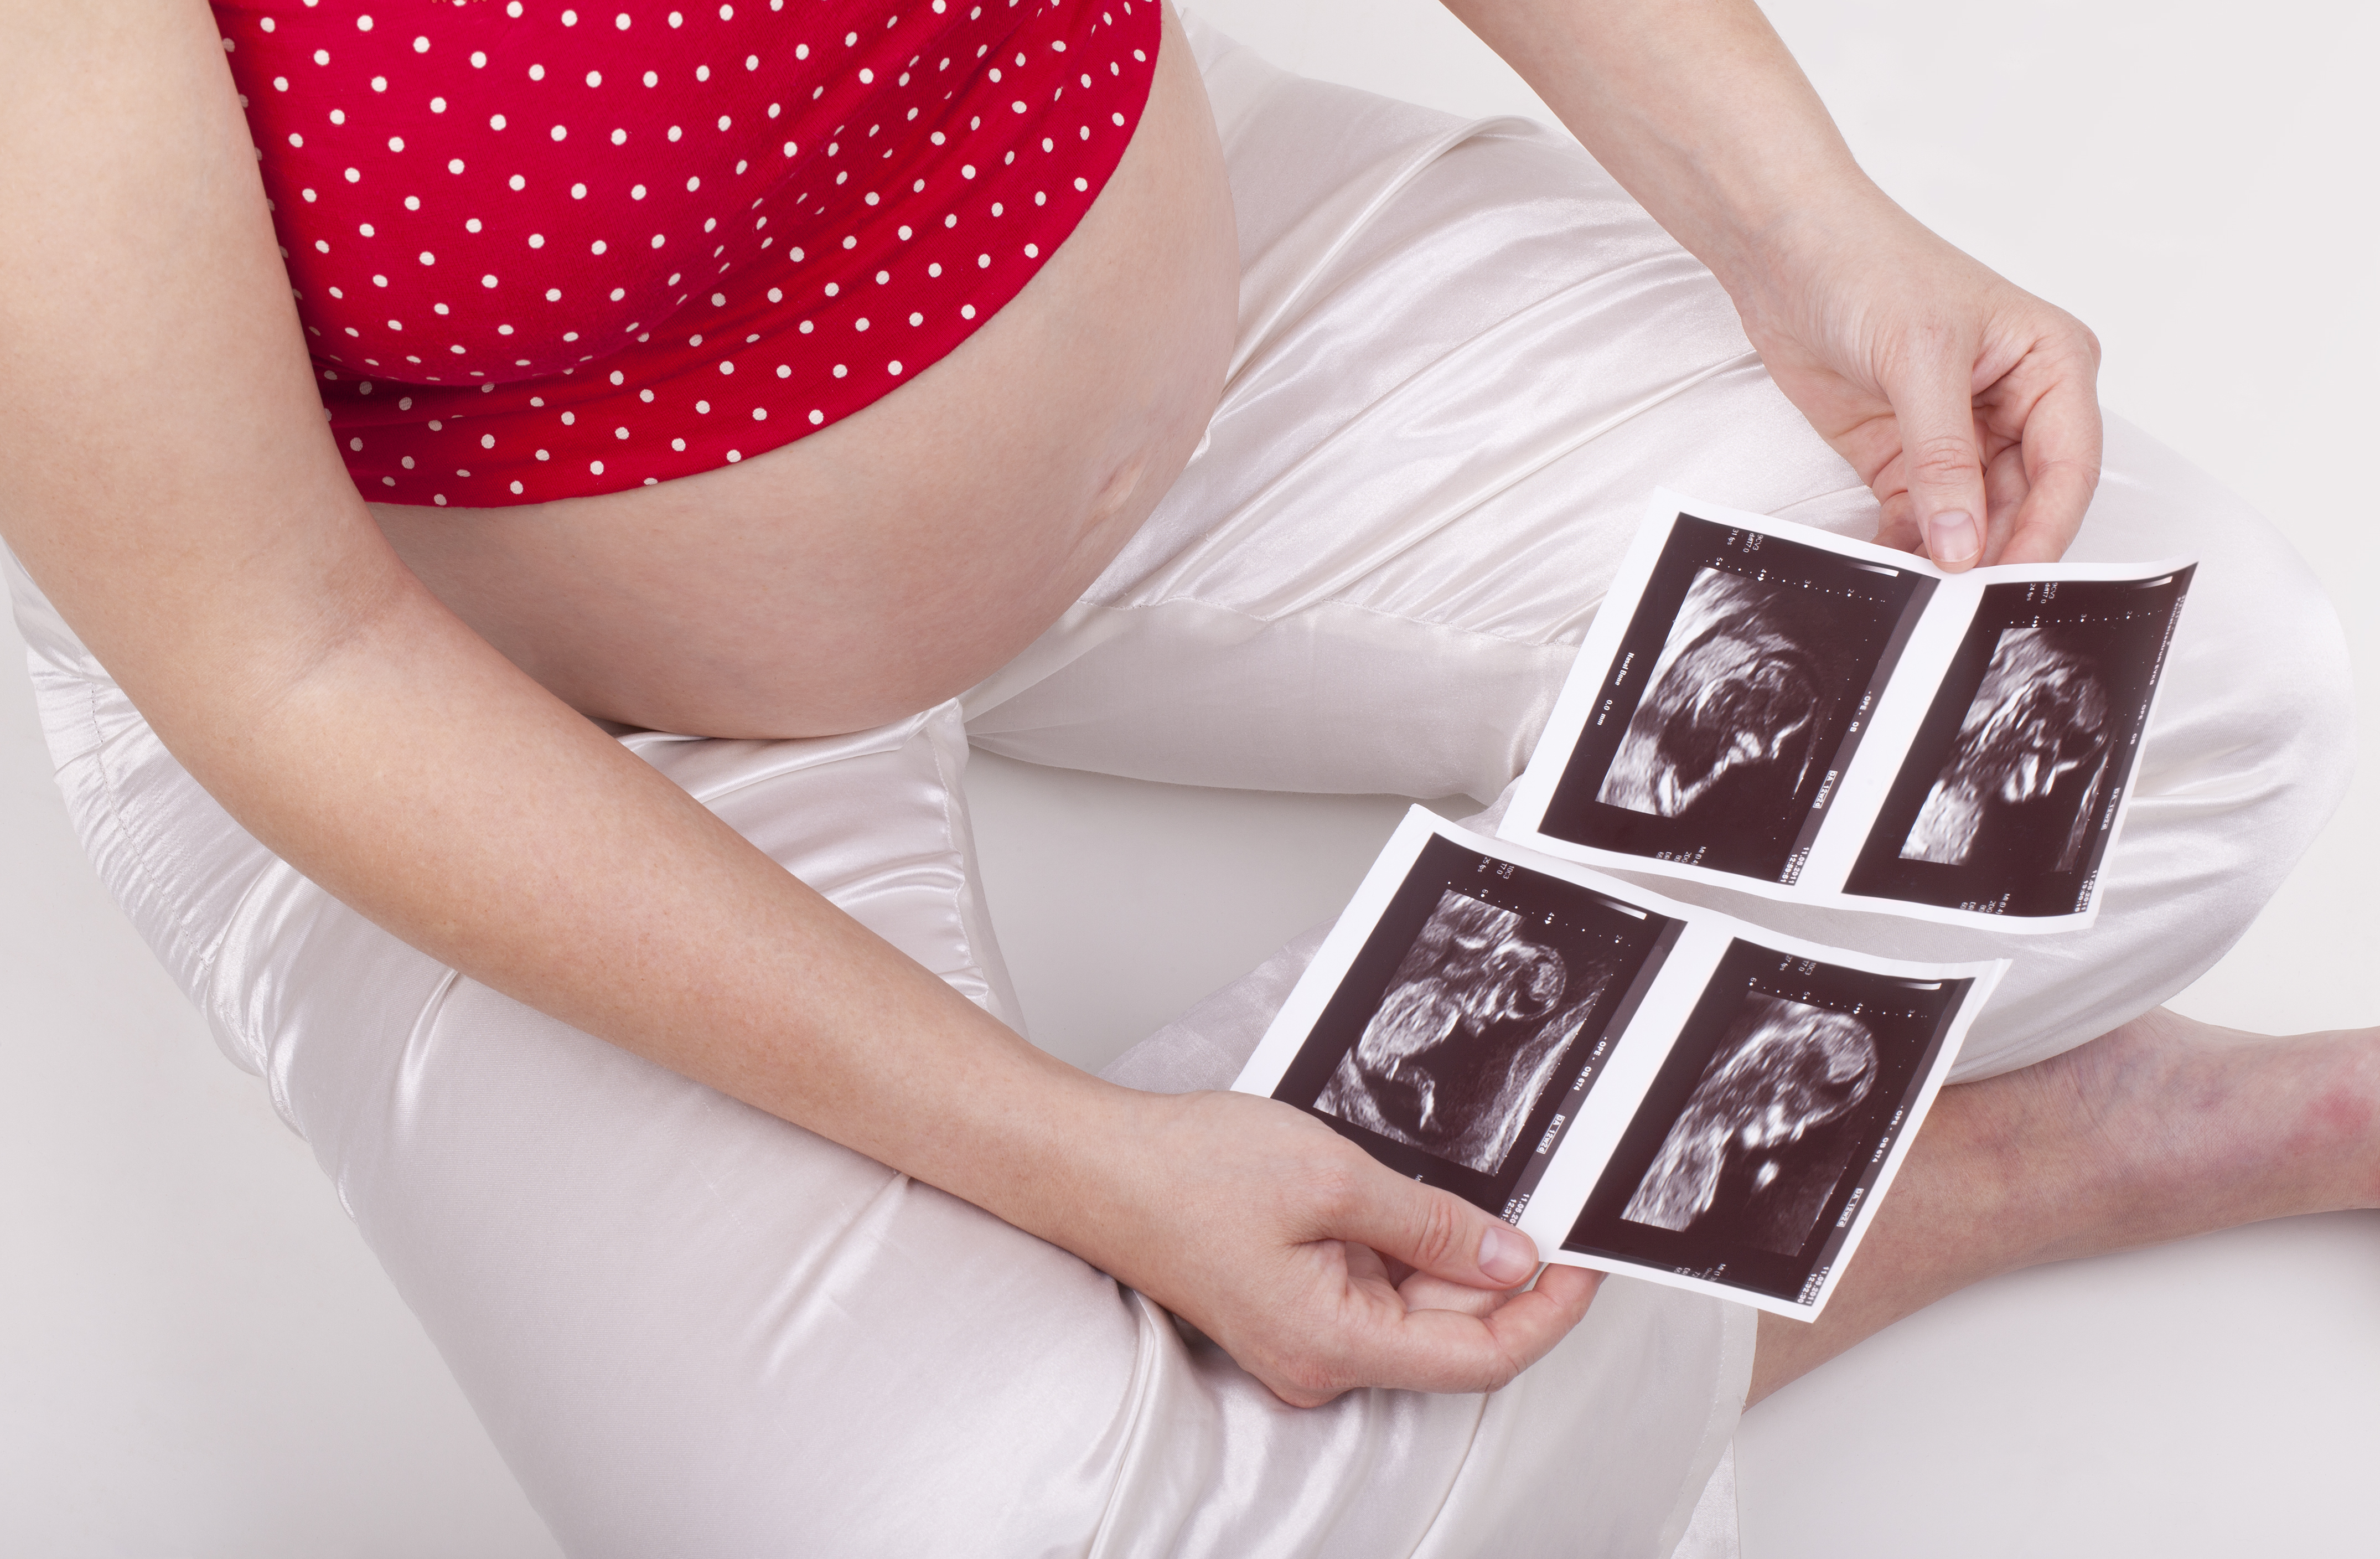 A pregnant woman holding sonogram | Source: Shutterstock